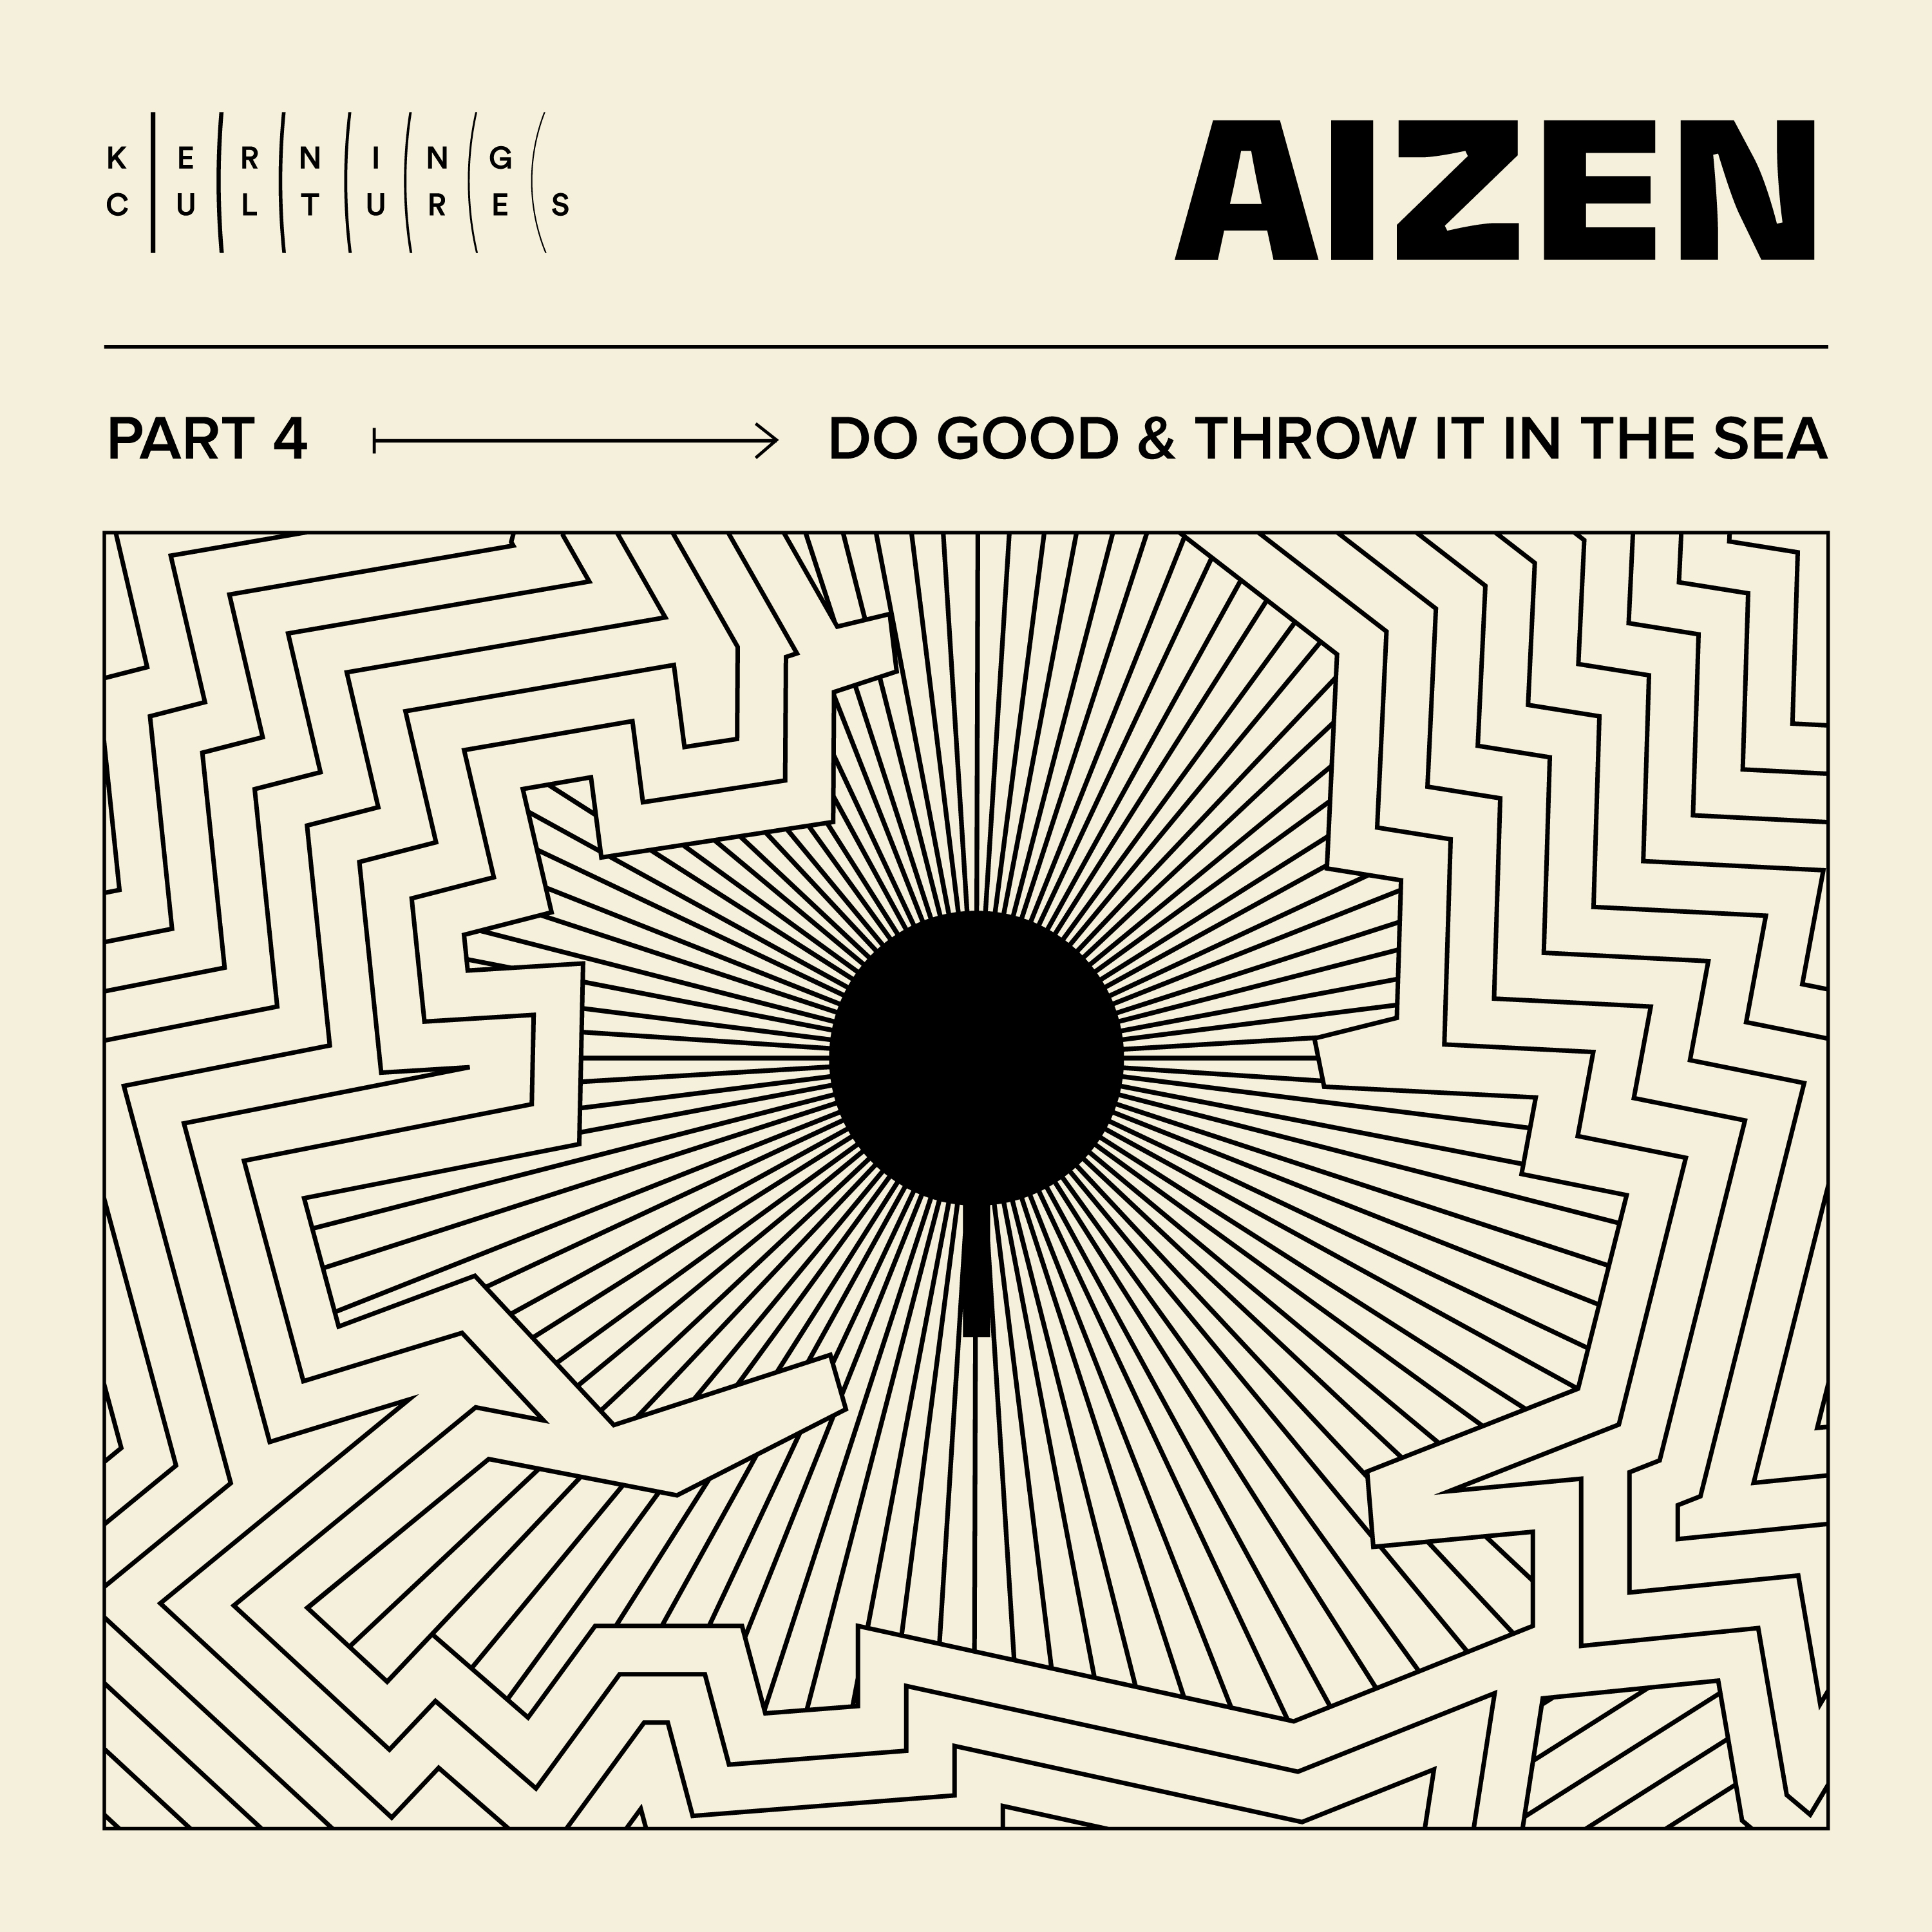 Aizen – Part 4: Do Good & Throw it in the Sea